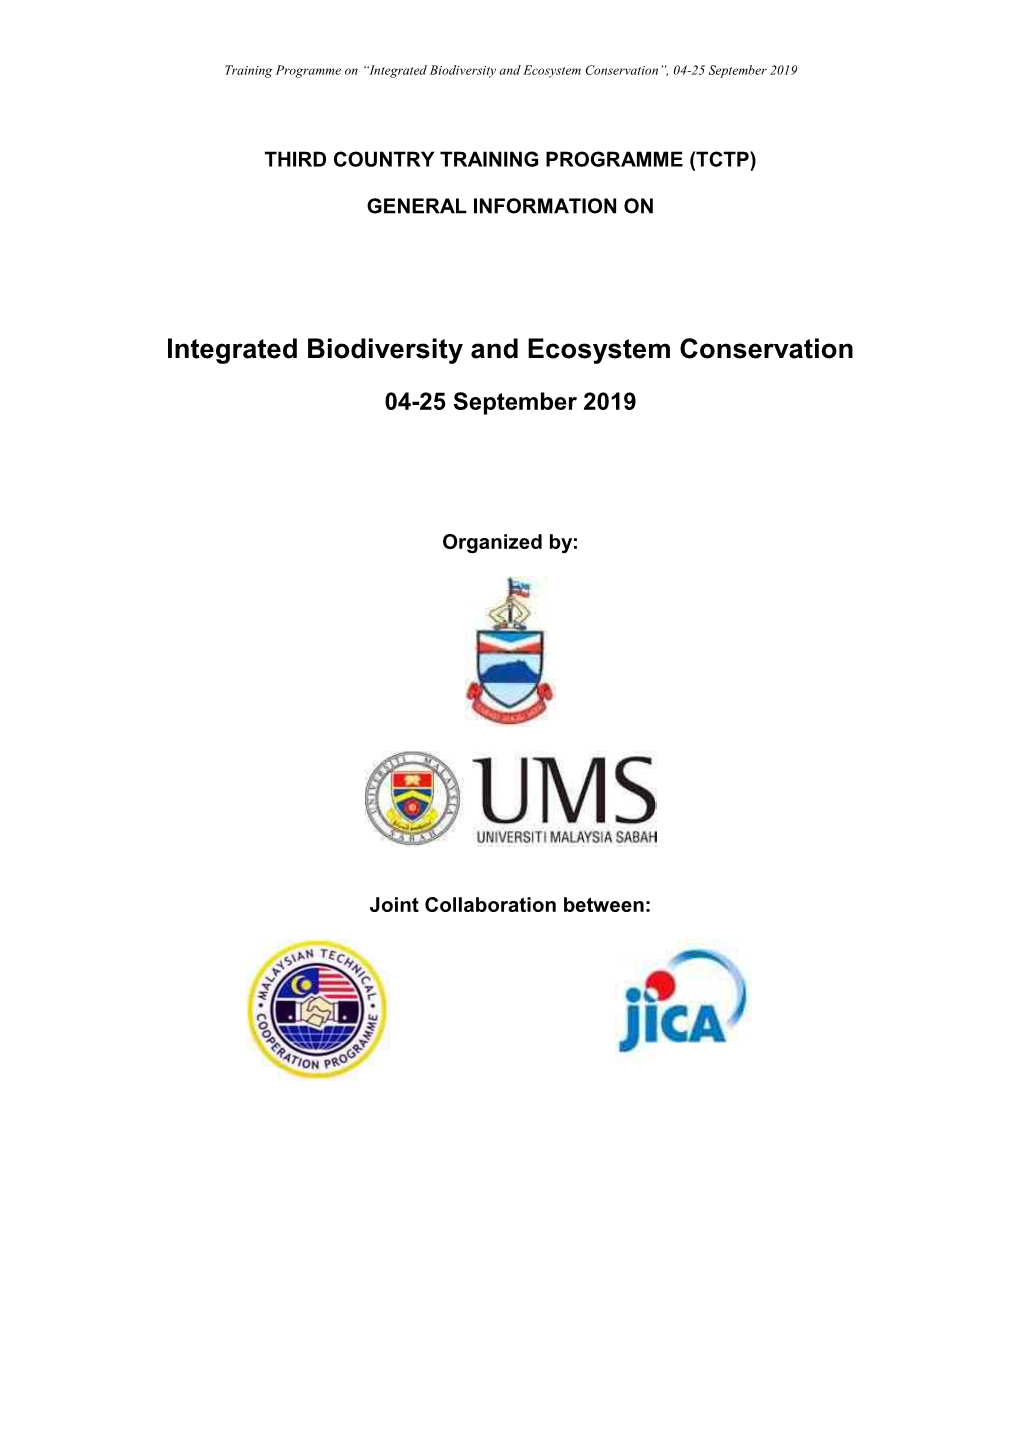 Integrated Biodiversity and Ecosystem Conservation”, 04-25 September 2019